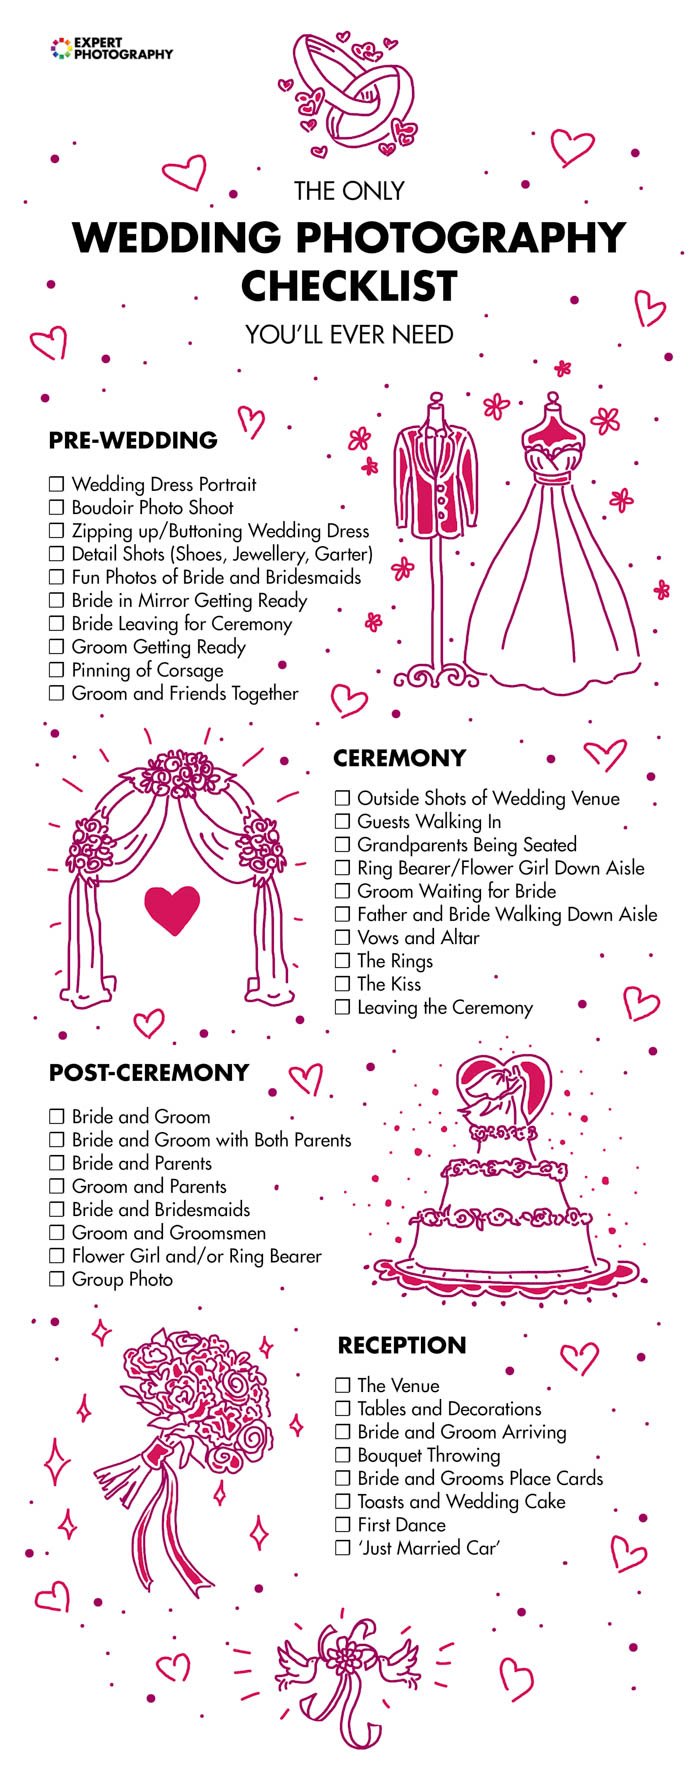 Wedding Photography Checklist: A Complete List of Must-Have Photos